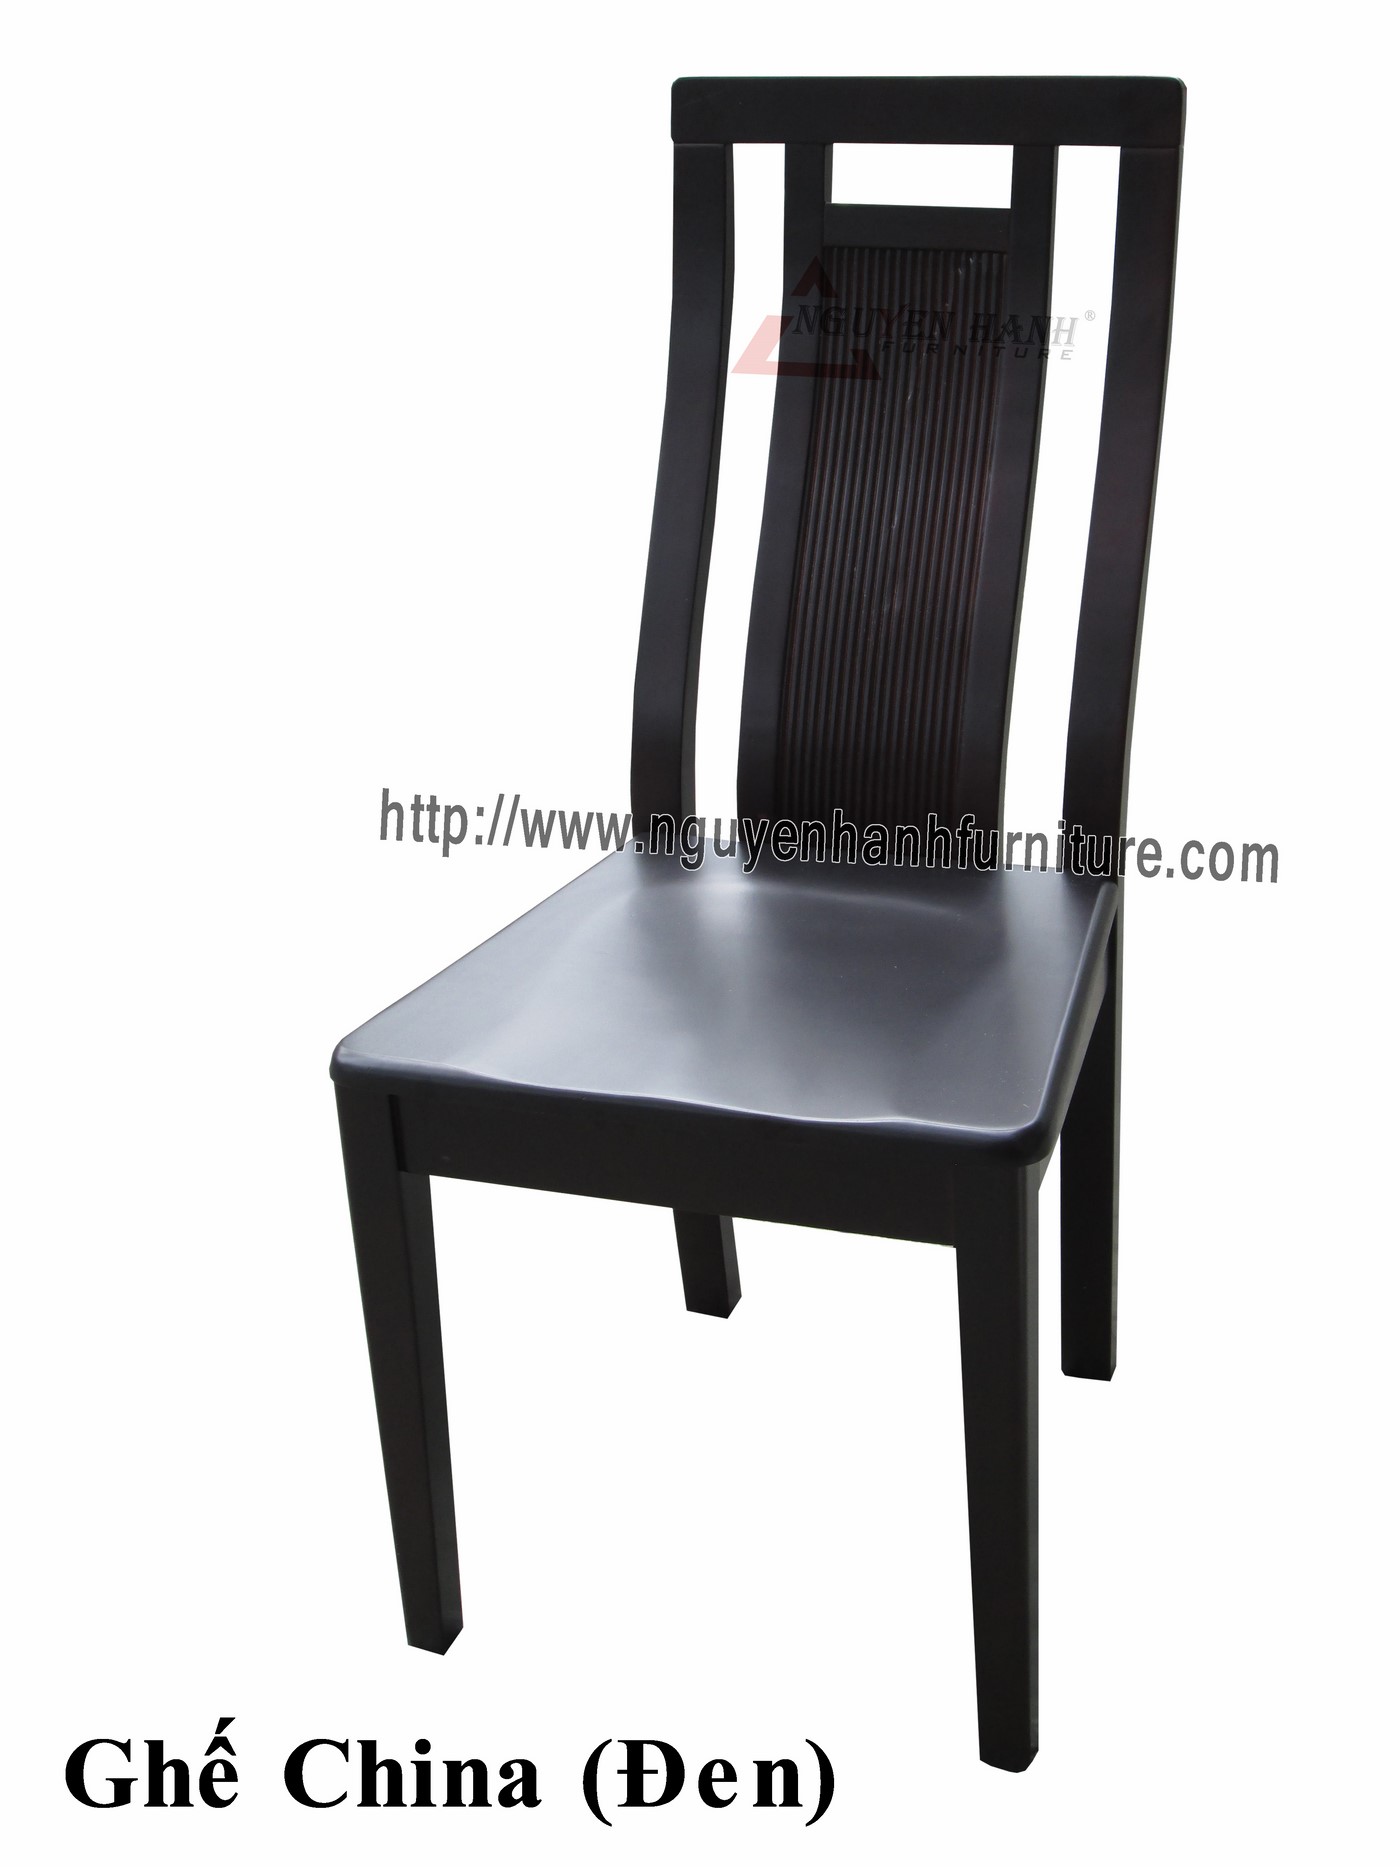 Name product: china chair (Black) - Dimensions: - Description: Wood natural rubber